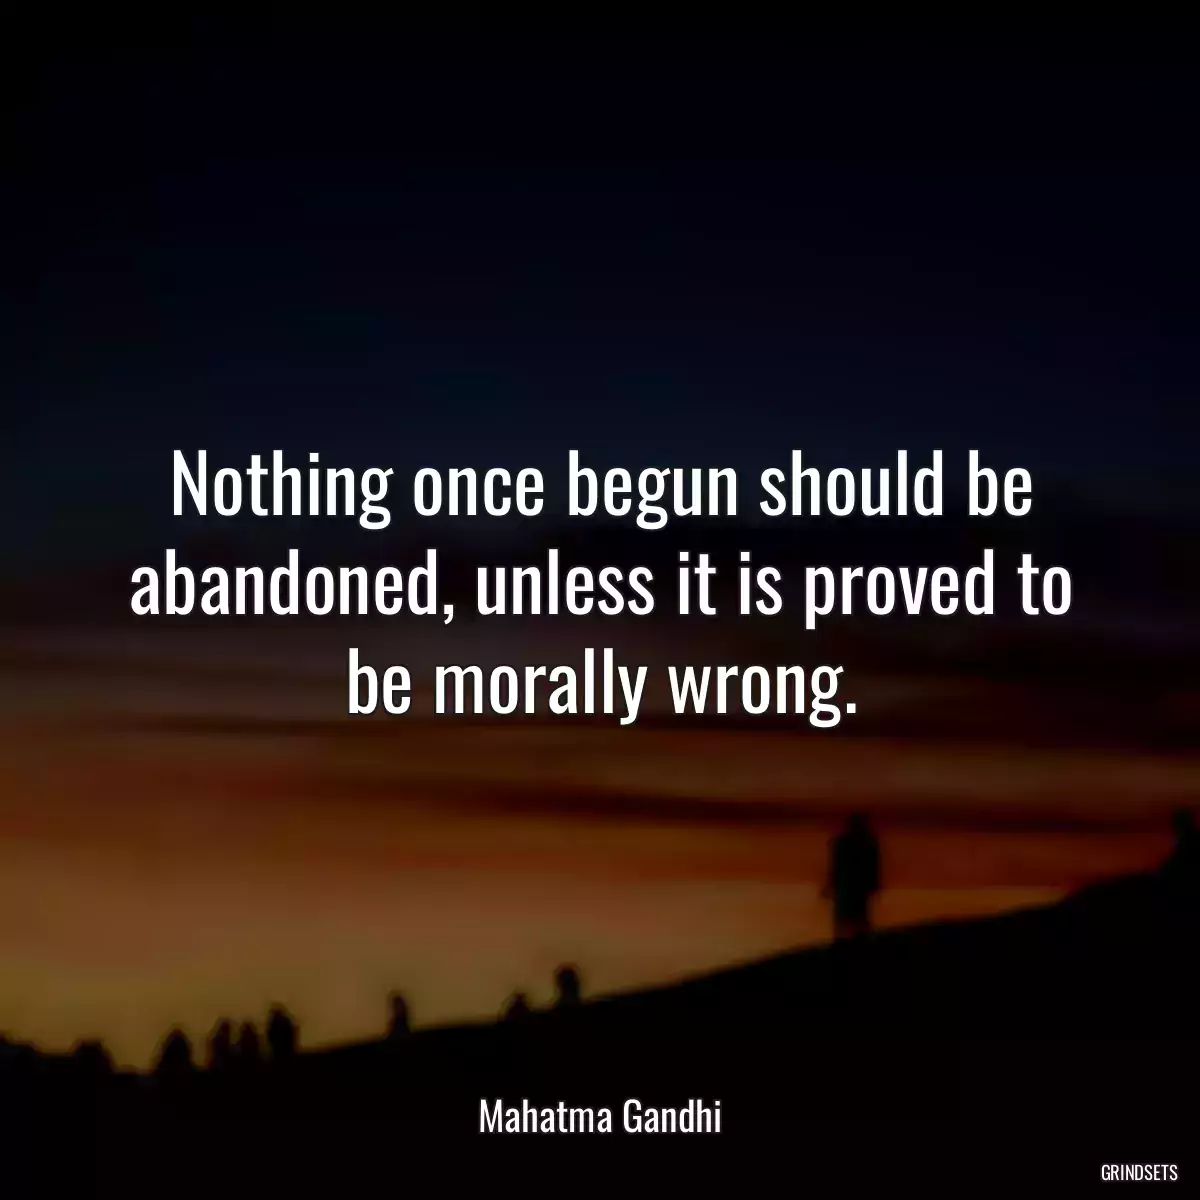 Nothing once begun should be abandoned, unless it is proved to be morally wrong.